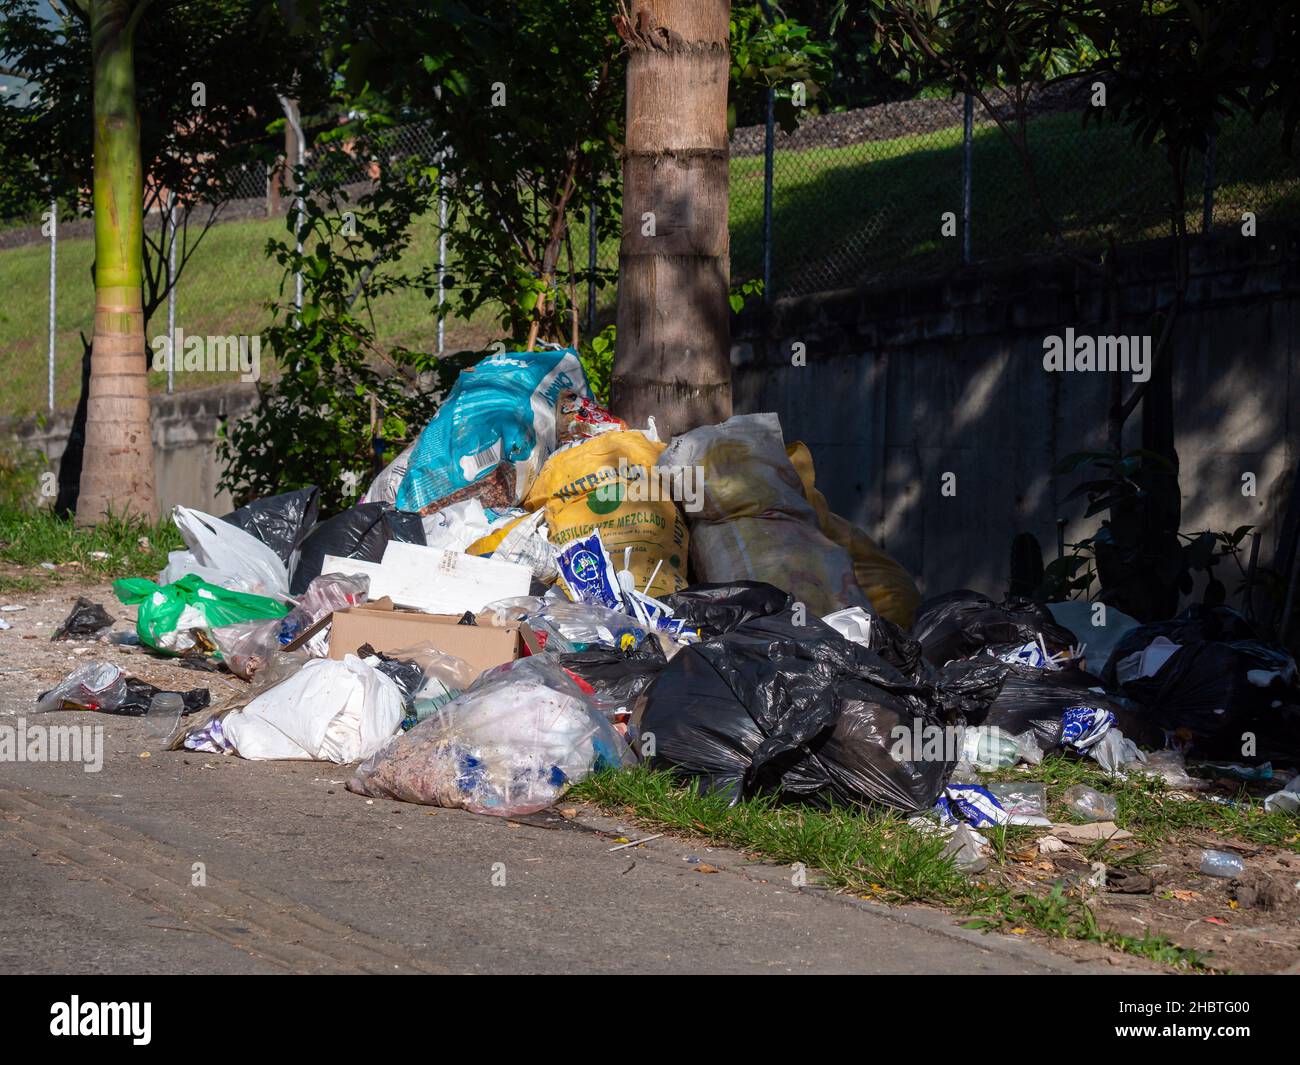 Medellin, Antioquia, Colombia - August 2 2021: Pile of Garbage Bags Accumulated on the Palm Tree to be Picked up by the Collection Truck Stock Photo